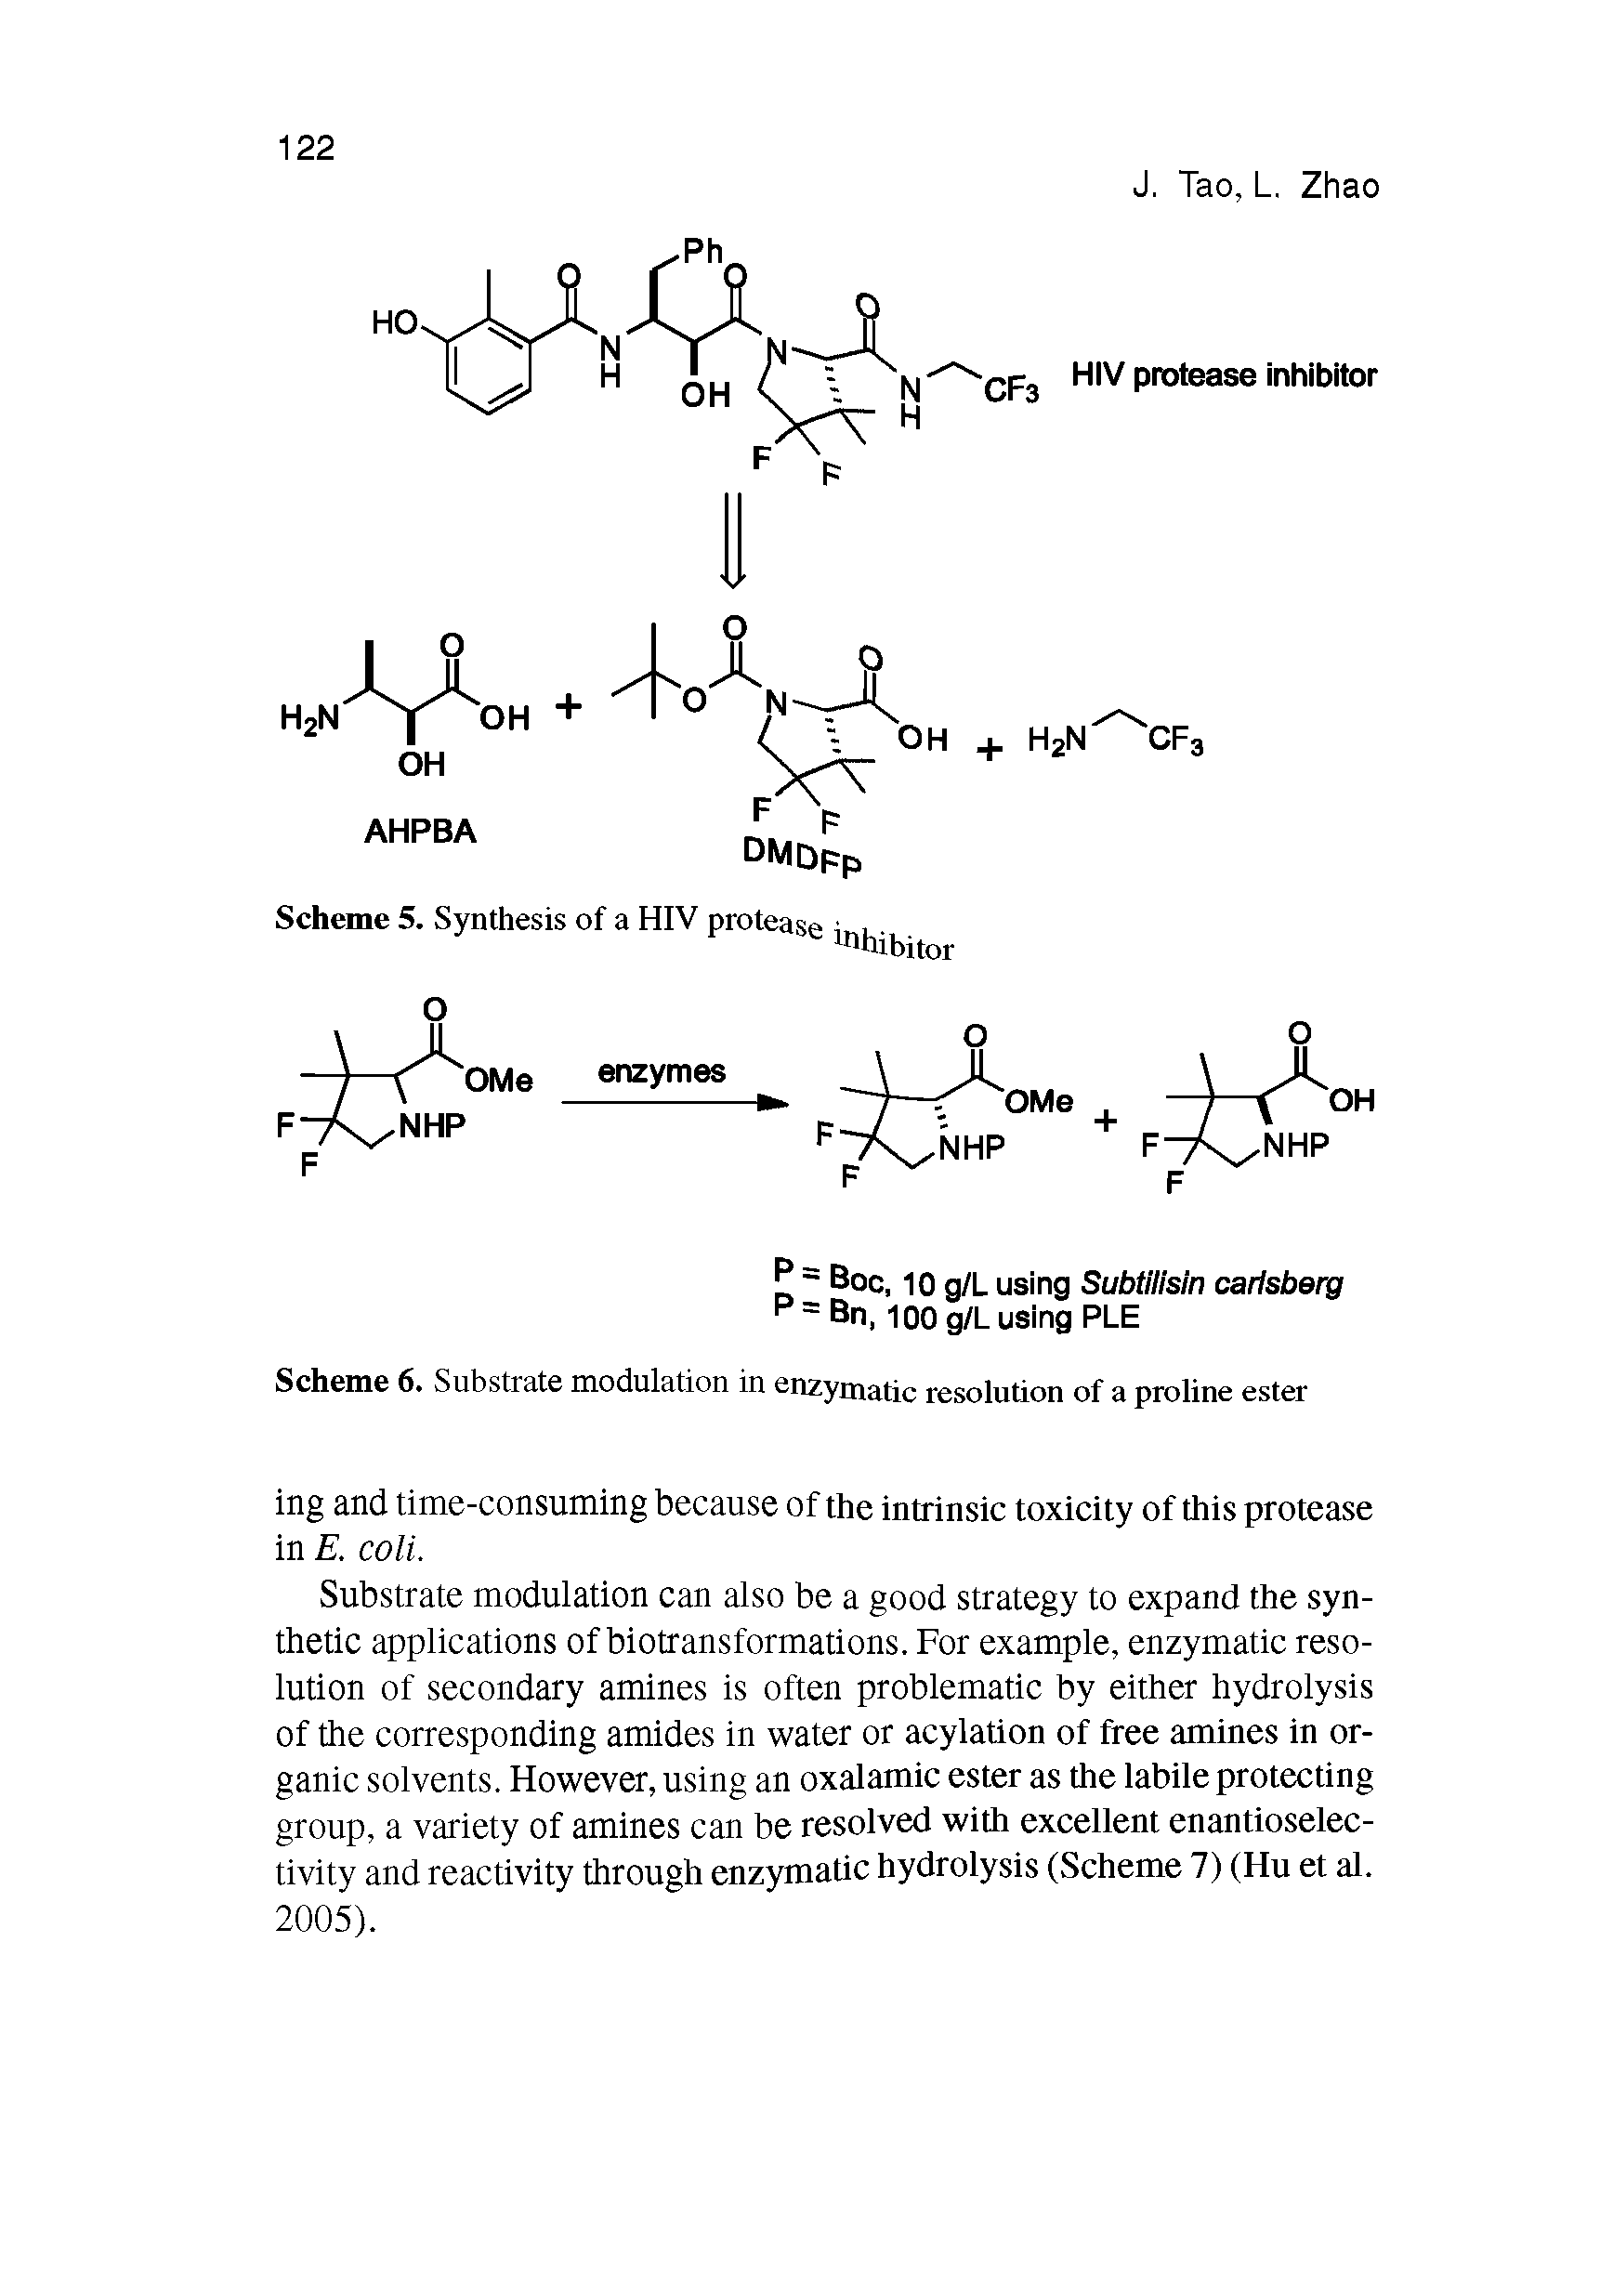 Scheme 6. Substrate modulation in enzymatic resolution of a proline ester...